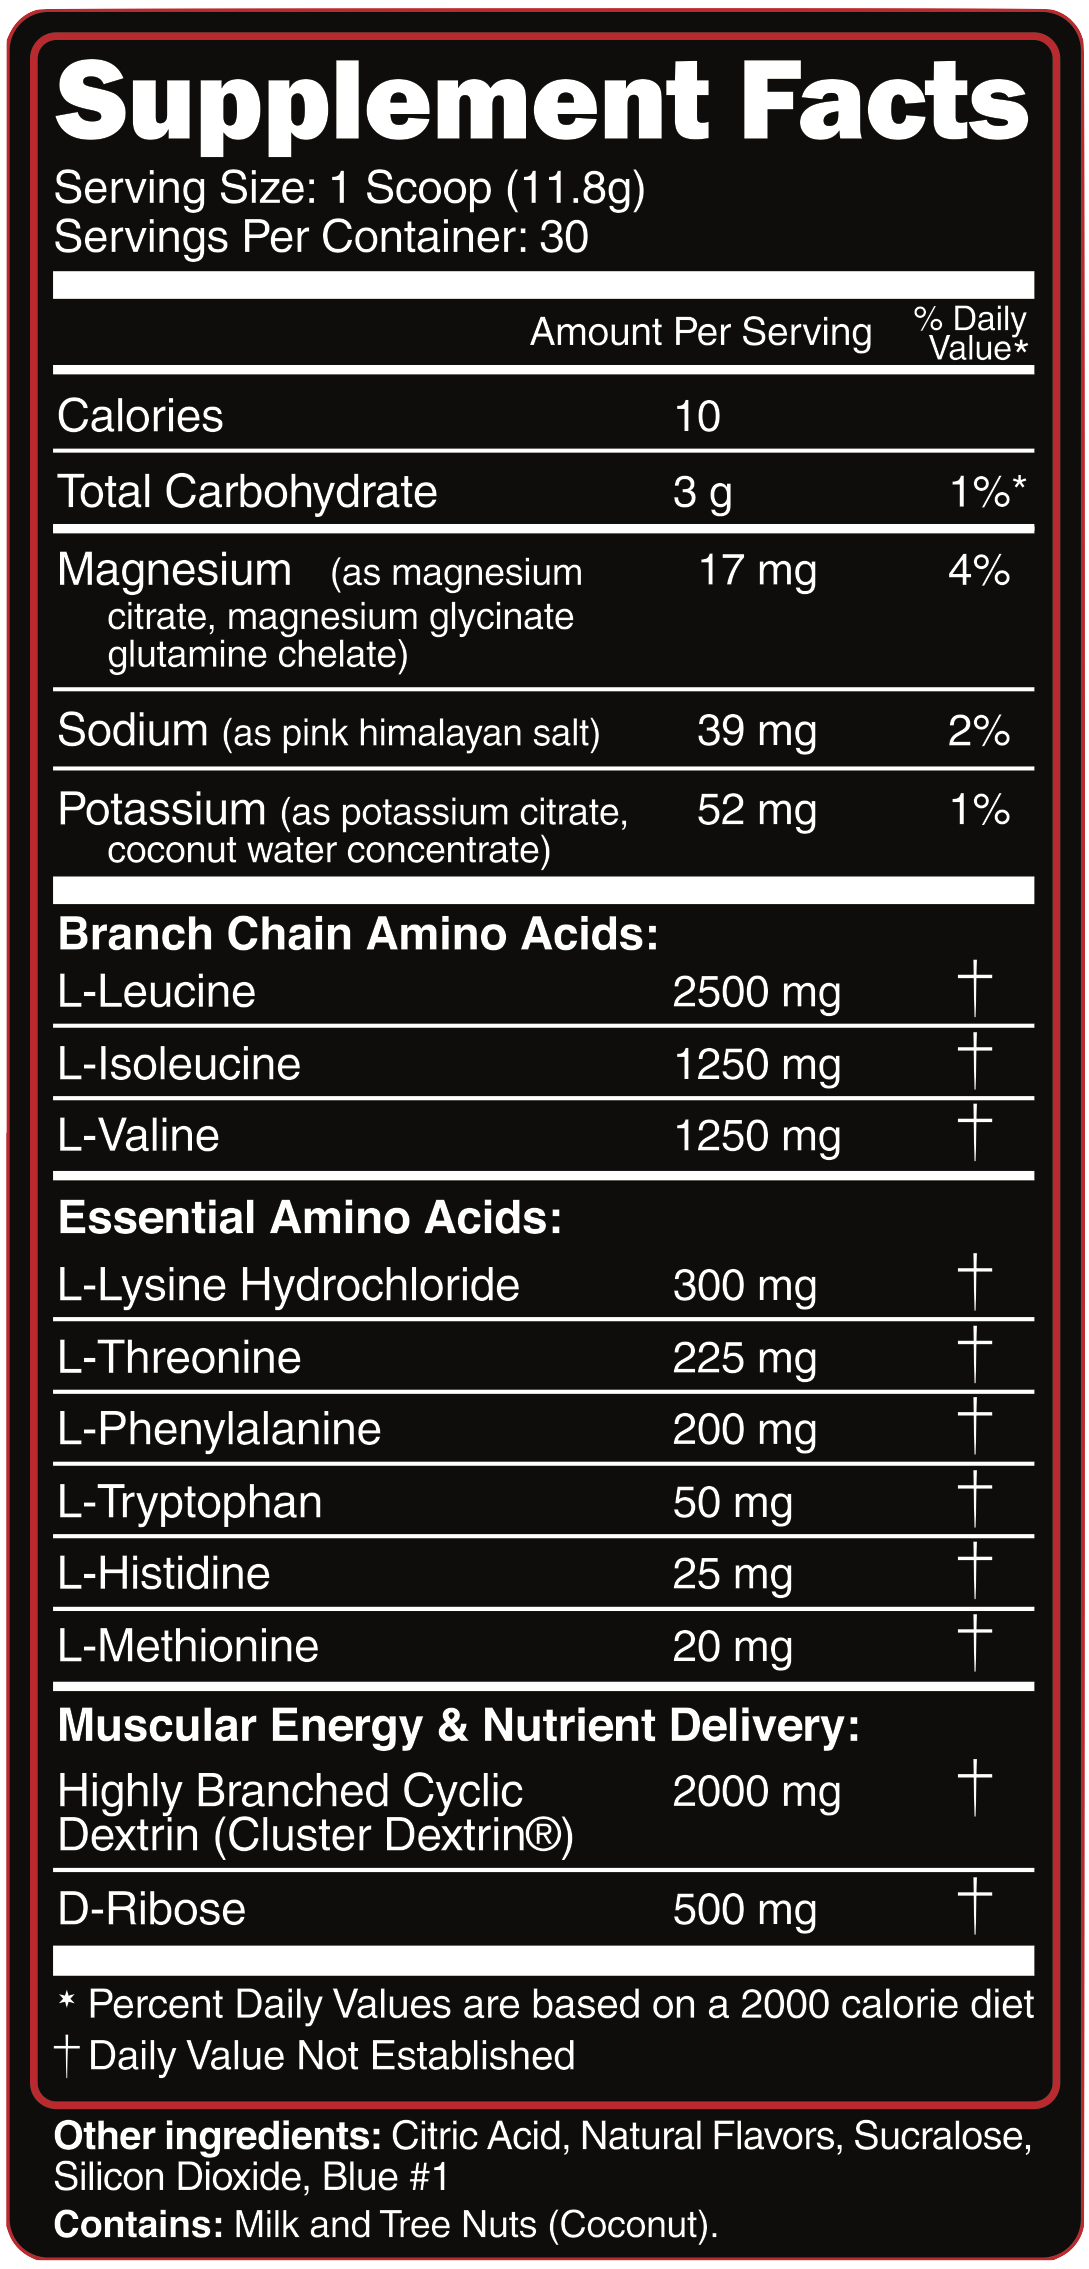 Supplement facts for a 1 scoop serving including amino acids, magnesium, sodium, potassium and calories. Contains milk and tree nuts.